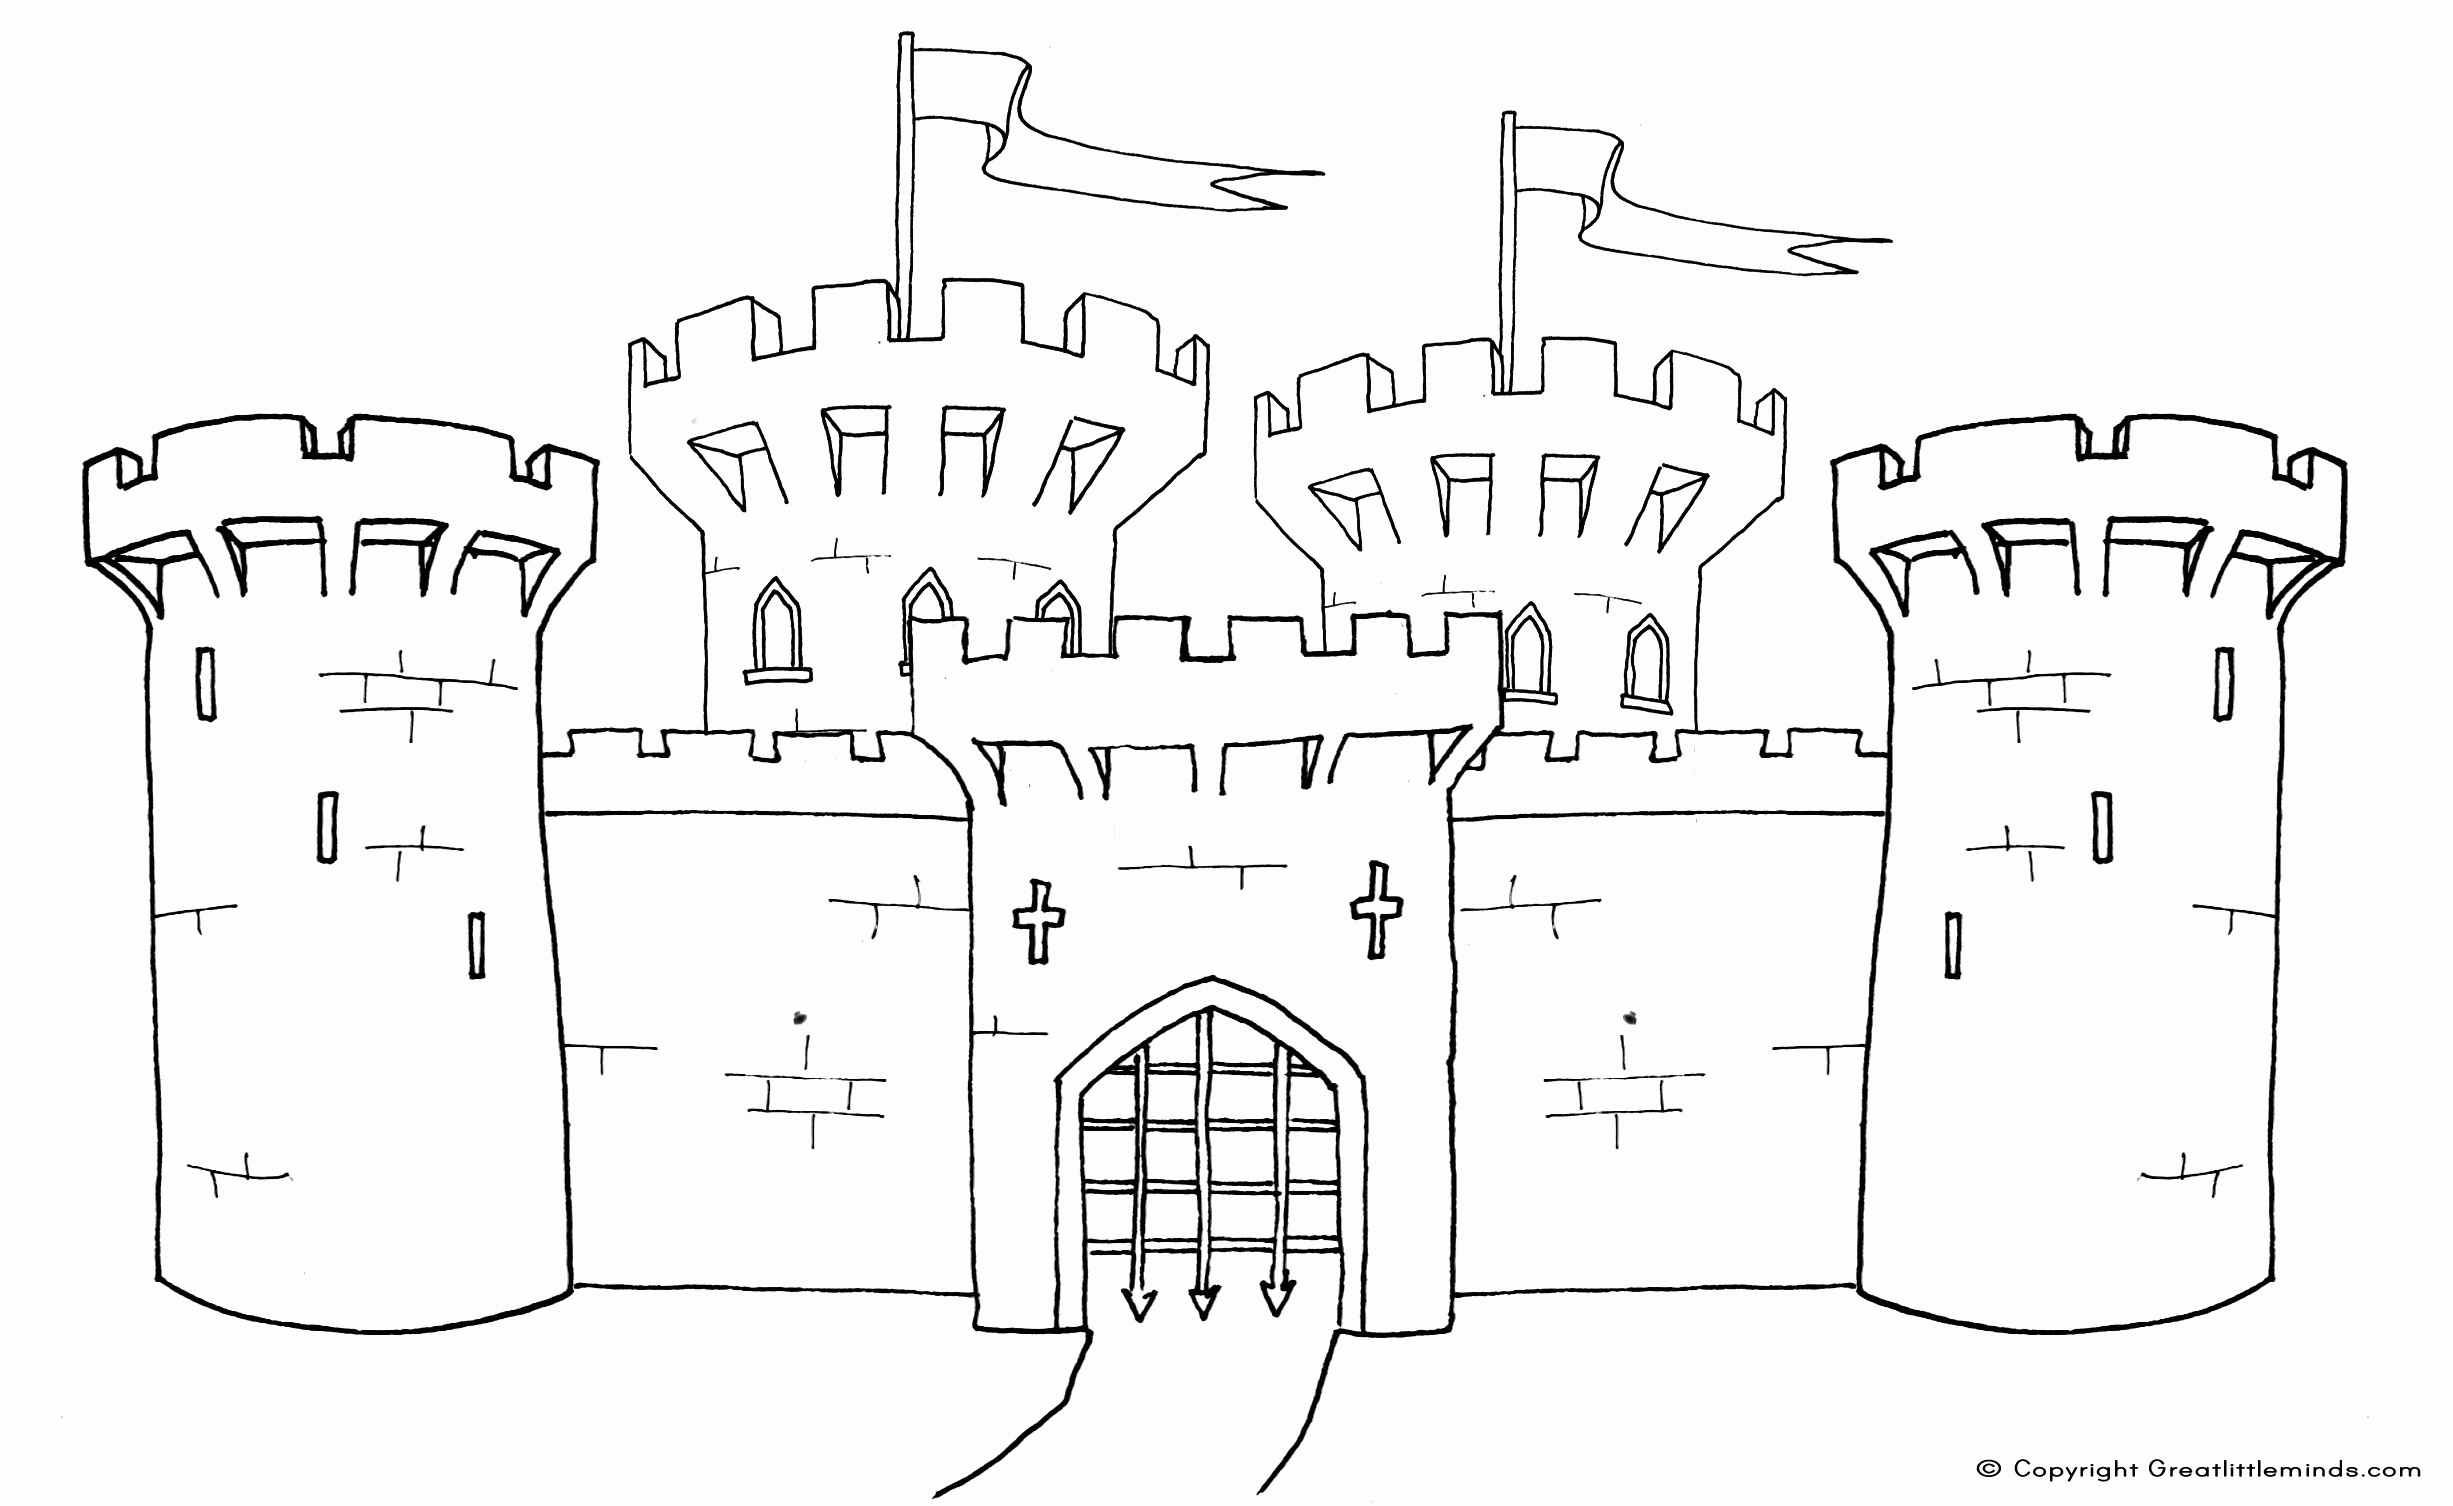 Bowser's Castle Coloring Pages Coloring Pages For All Ages Coloring